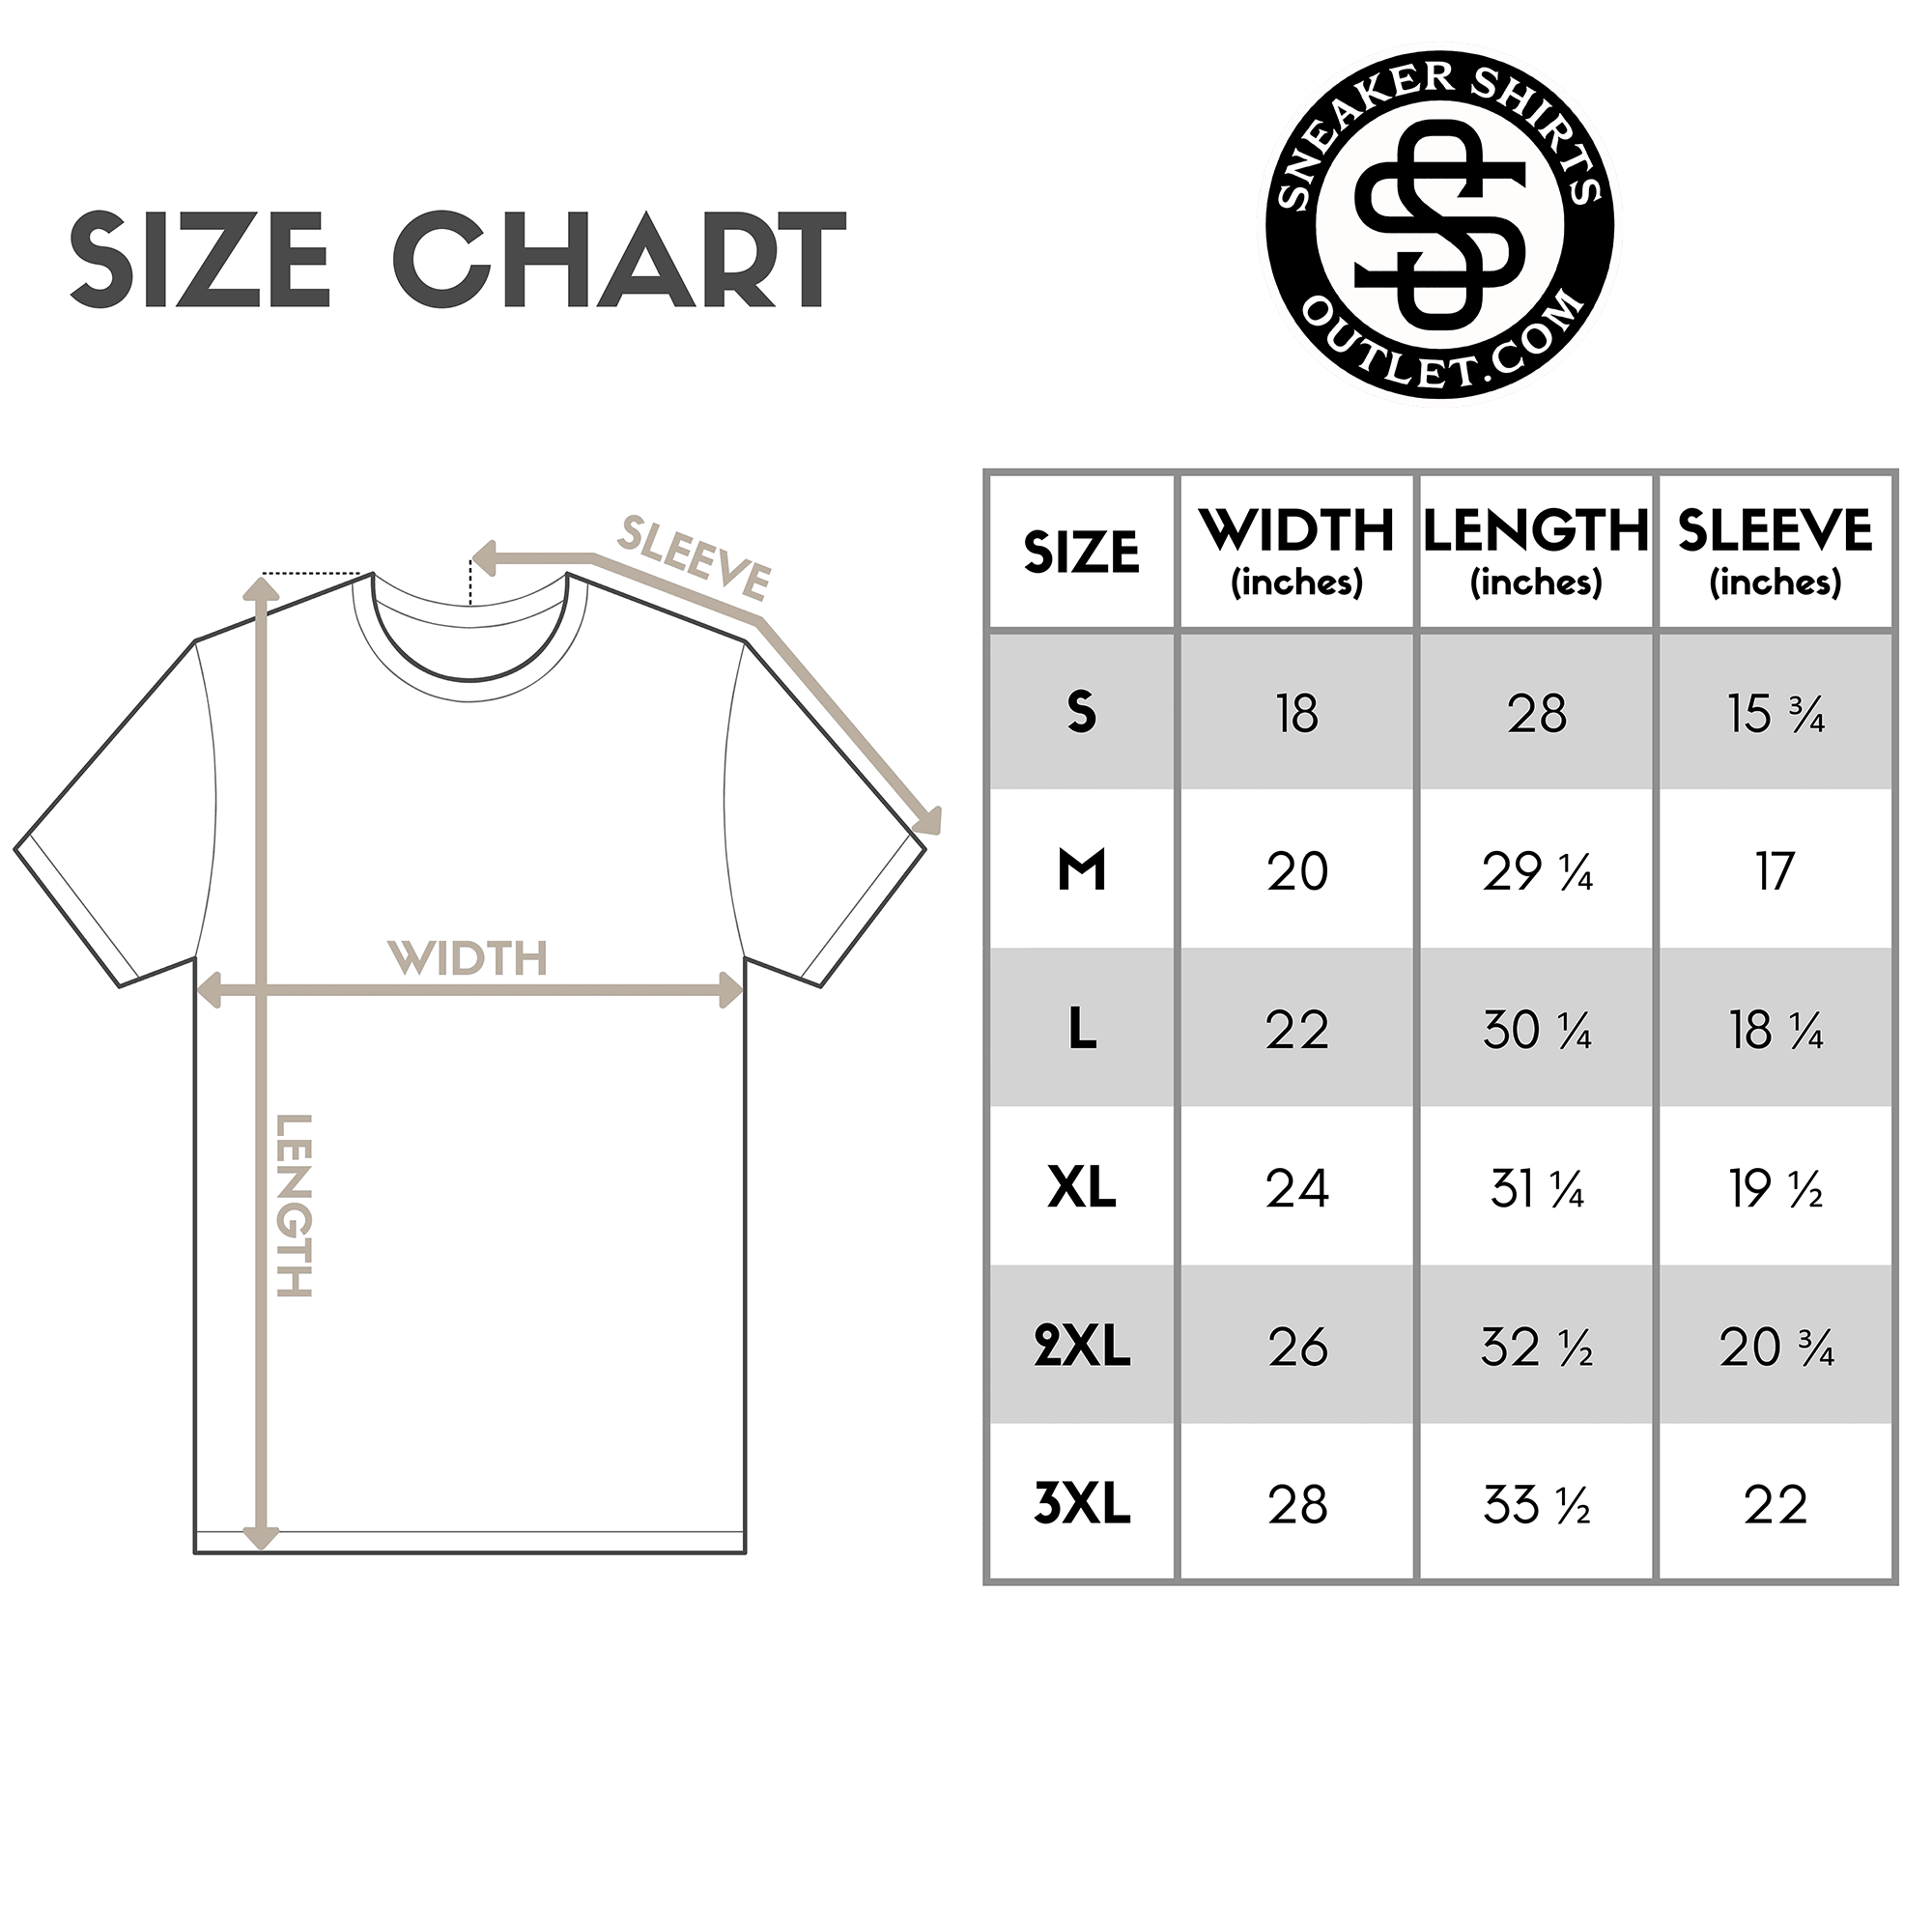 size chart We Grind Shirt Yeezy Boost 700 Bright Blue photo